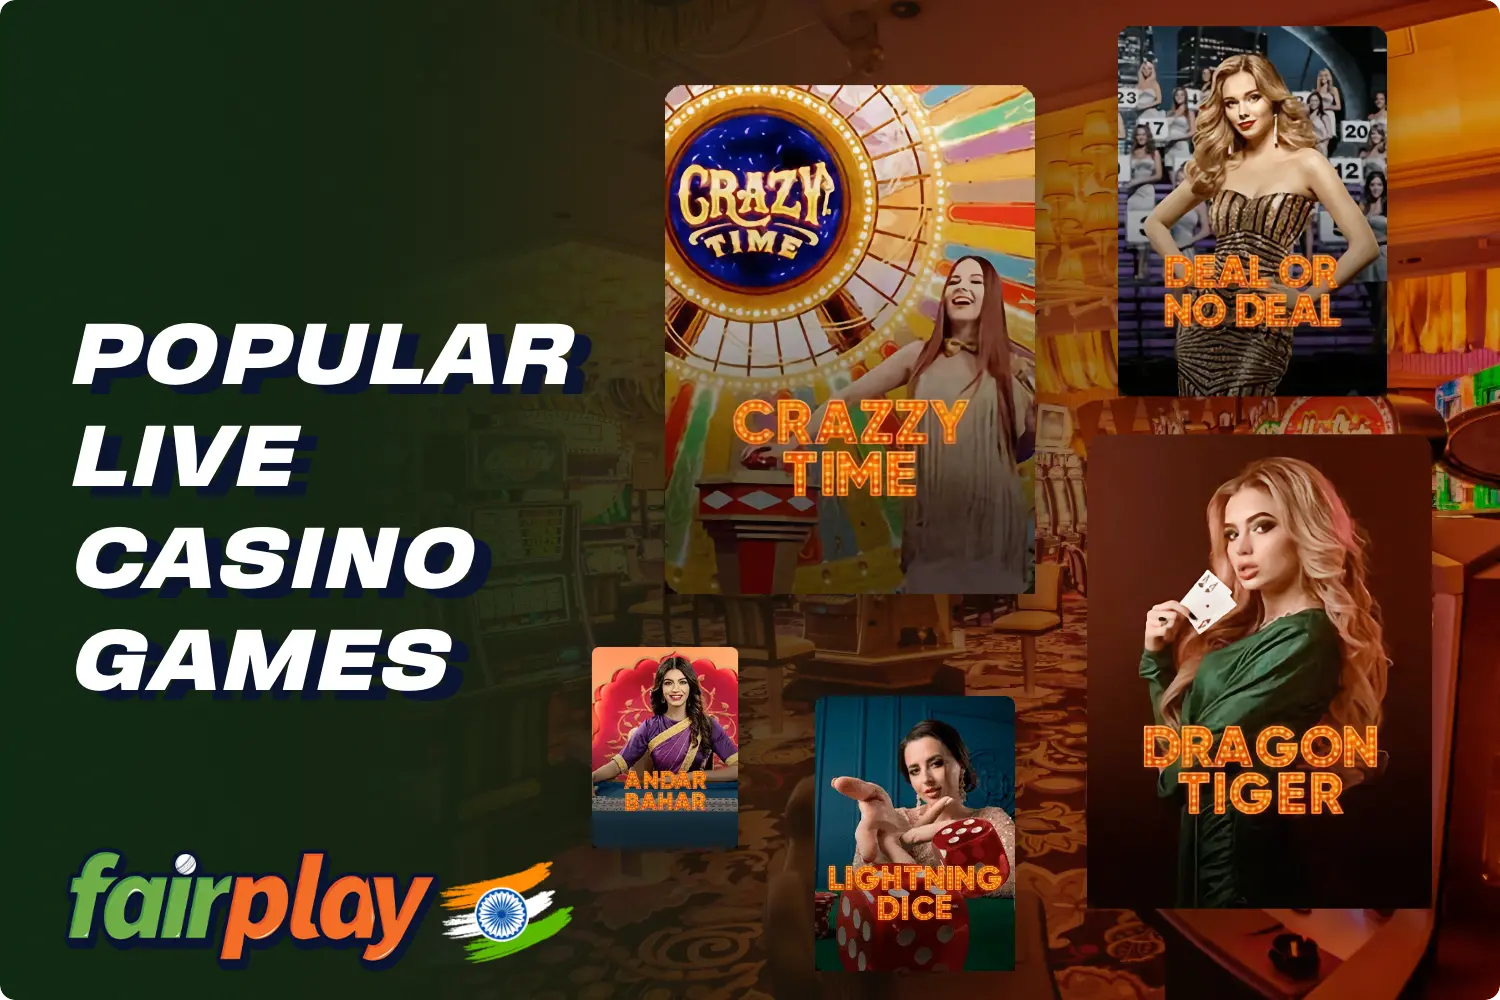 Fairplay's live casino offers users the best live dealer games at Fairplay Live Casino